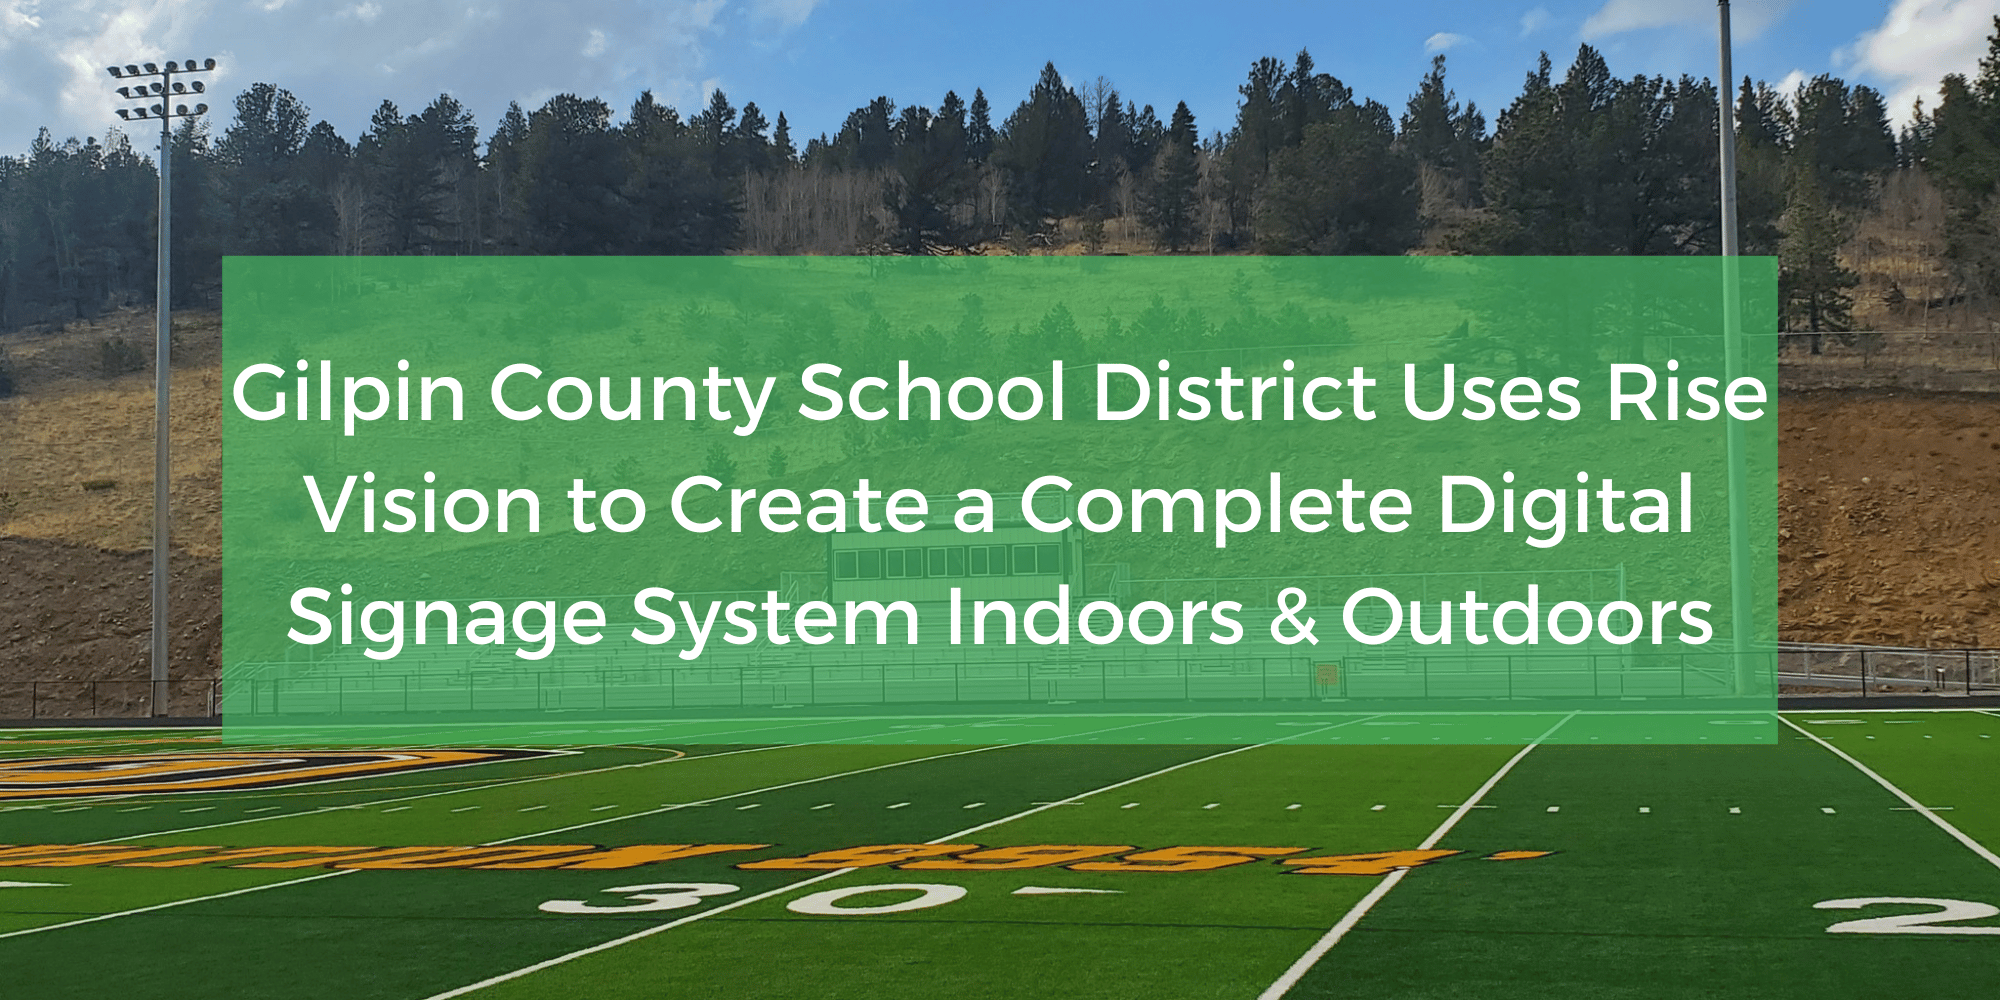 Gilpin County School District Uses Rise Vision to Create a Complete Digital Signage System Indoors and Outdoors